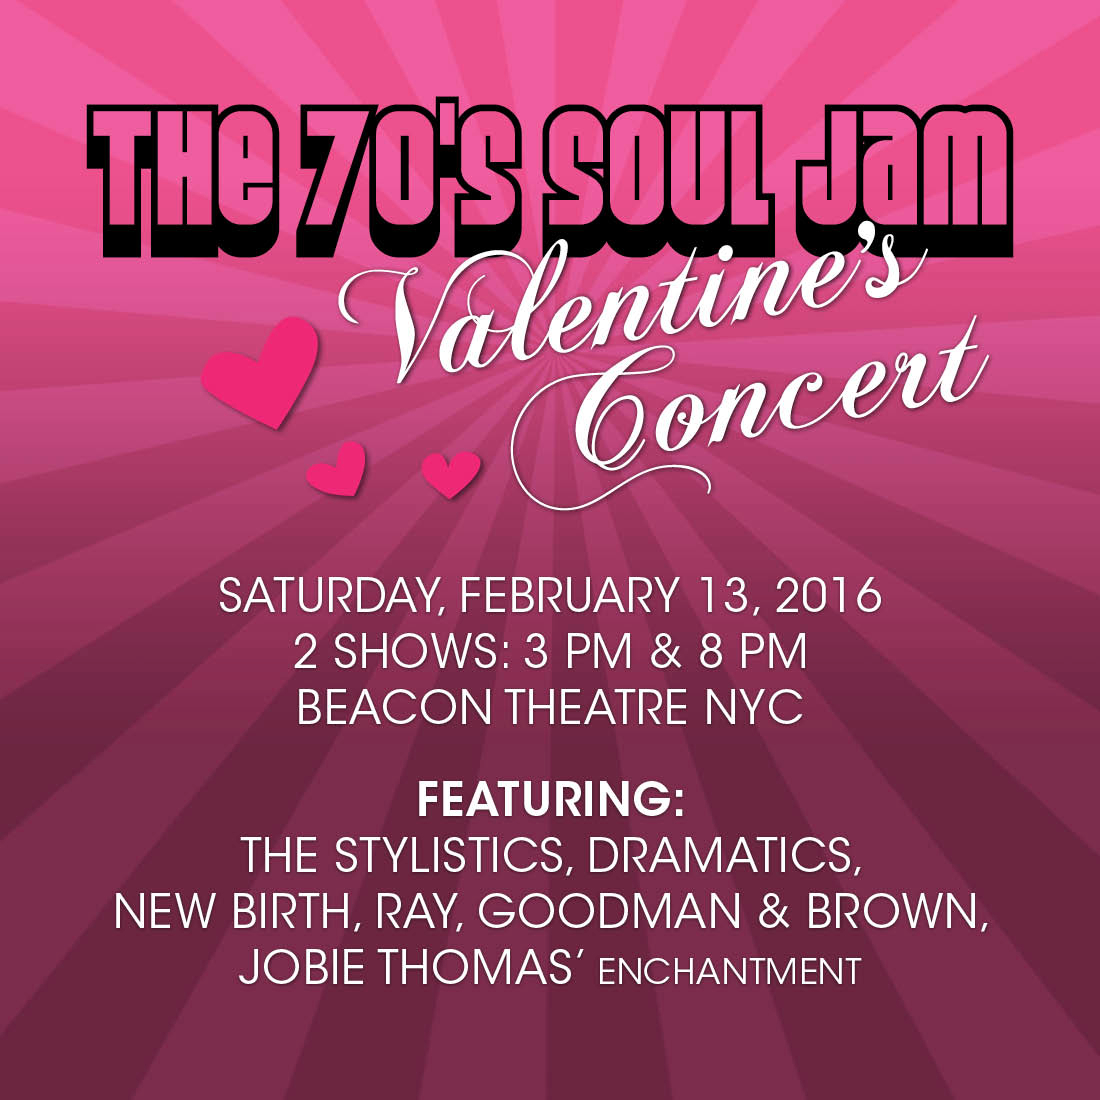 "The 70's Soul Jam Valentine's Concert" and "An Evening of Love" with